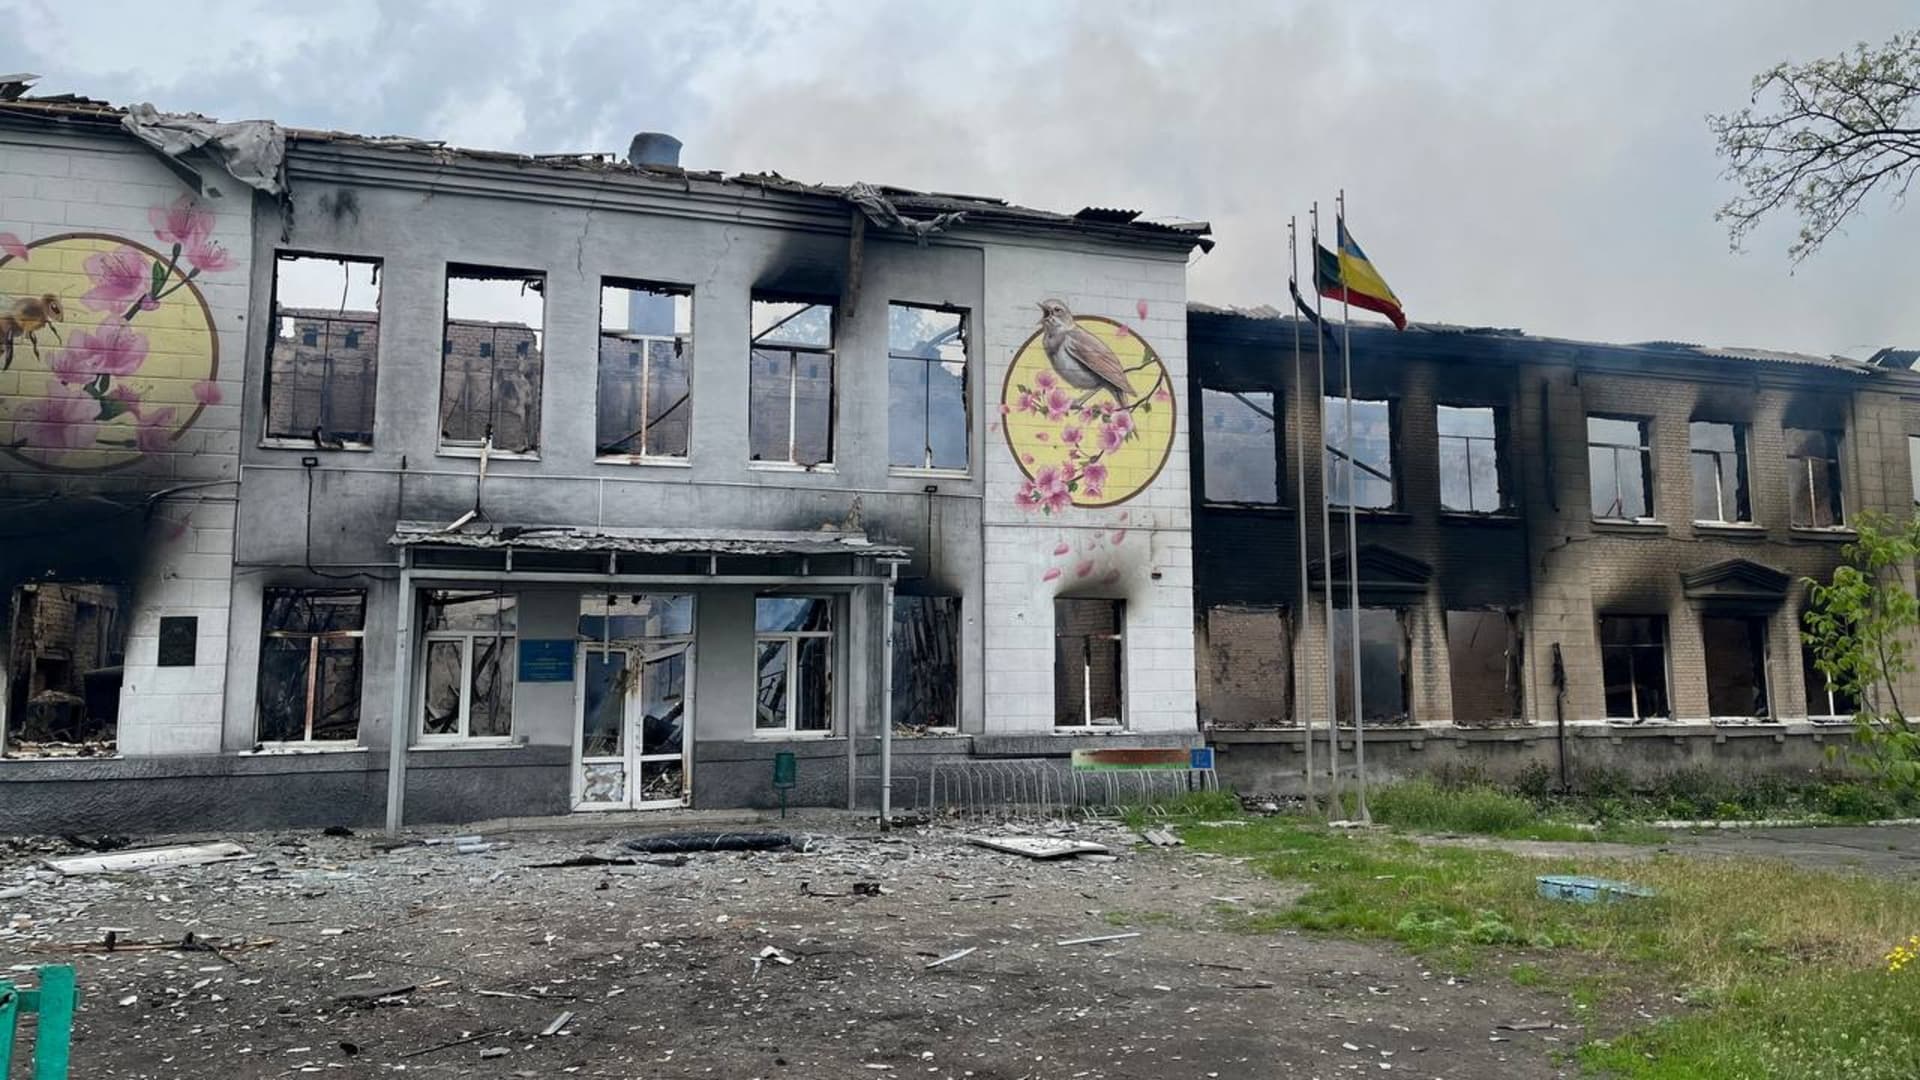 Remains of a school destroyed amid the ongoing Russian invasion of Ukraine are pictured, in Avdiivka, Donetsk Region, Ukraine in this still image released on May 18, 2022. 